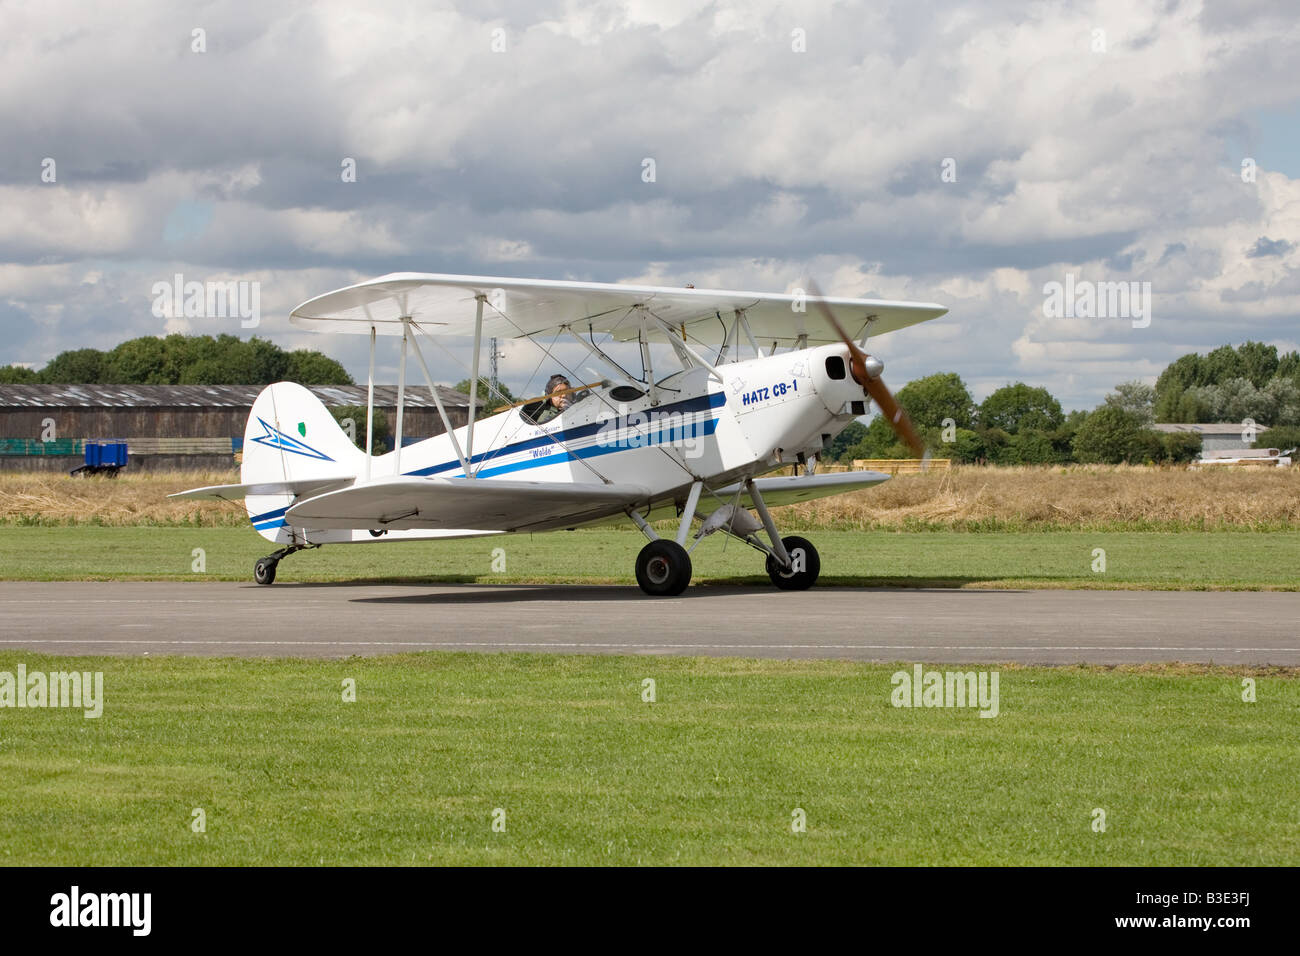 Hatz CB-1 G-BRSKY taxiing at Breighton Airfield Stock Photo